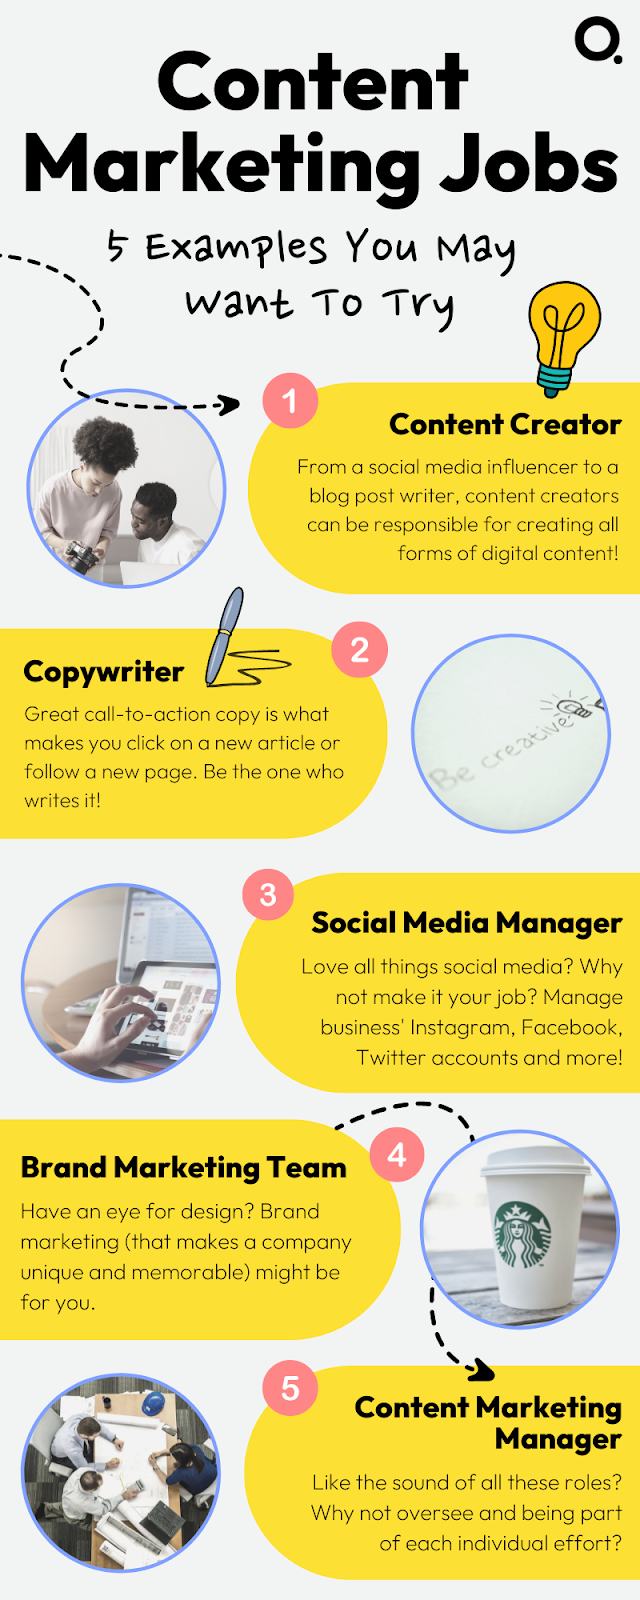 Infographics showing 5 examples of content marketing jobs you may want to try.